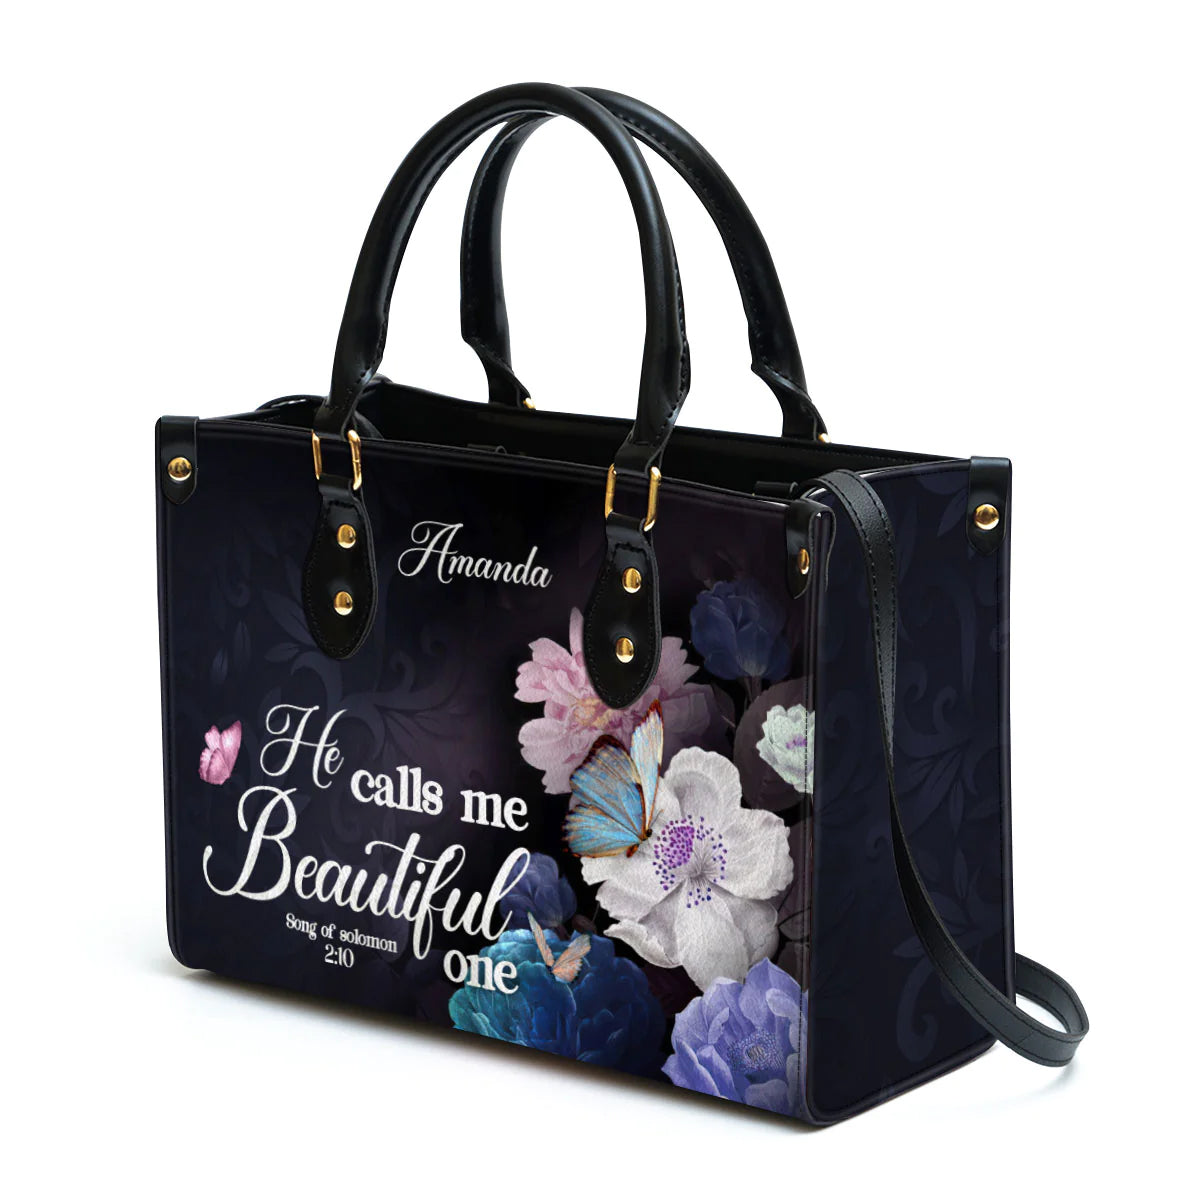 Christianart Handbag, Personalized Hand Bag, Solomon 2:10, He Calls Me Beautiful One, Personalized Gifts, Gifts for Women. - Christian Art Bag